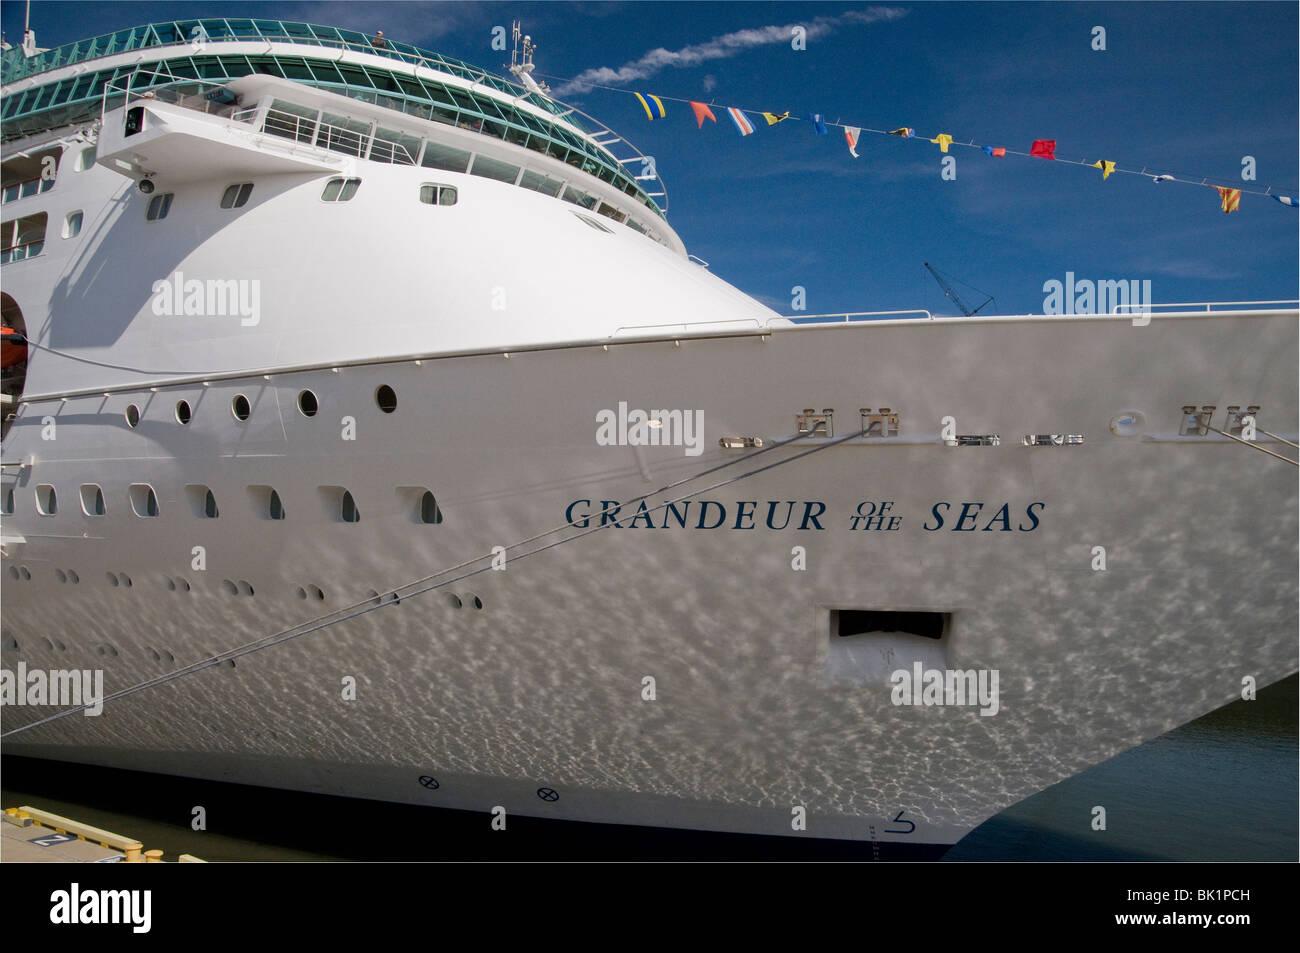 Royal Caribbean's 2,446-guest Grandeur of the Seas is one of the world's top cruise ships and is berthed at the Port of Tampa. Stock Photo